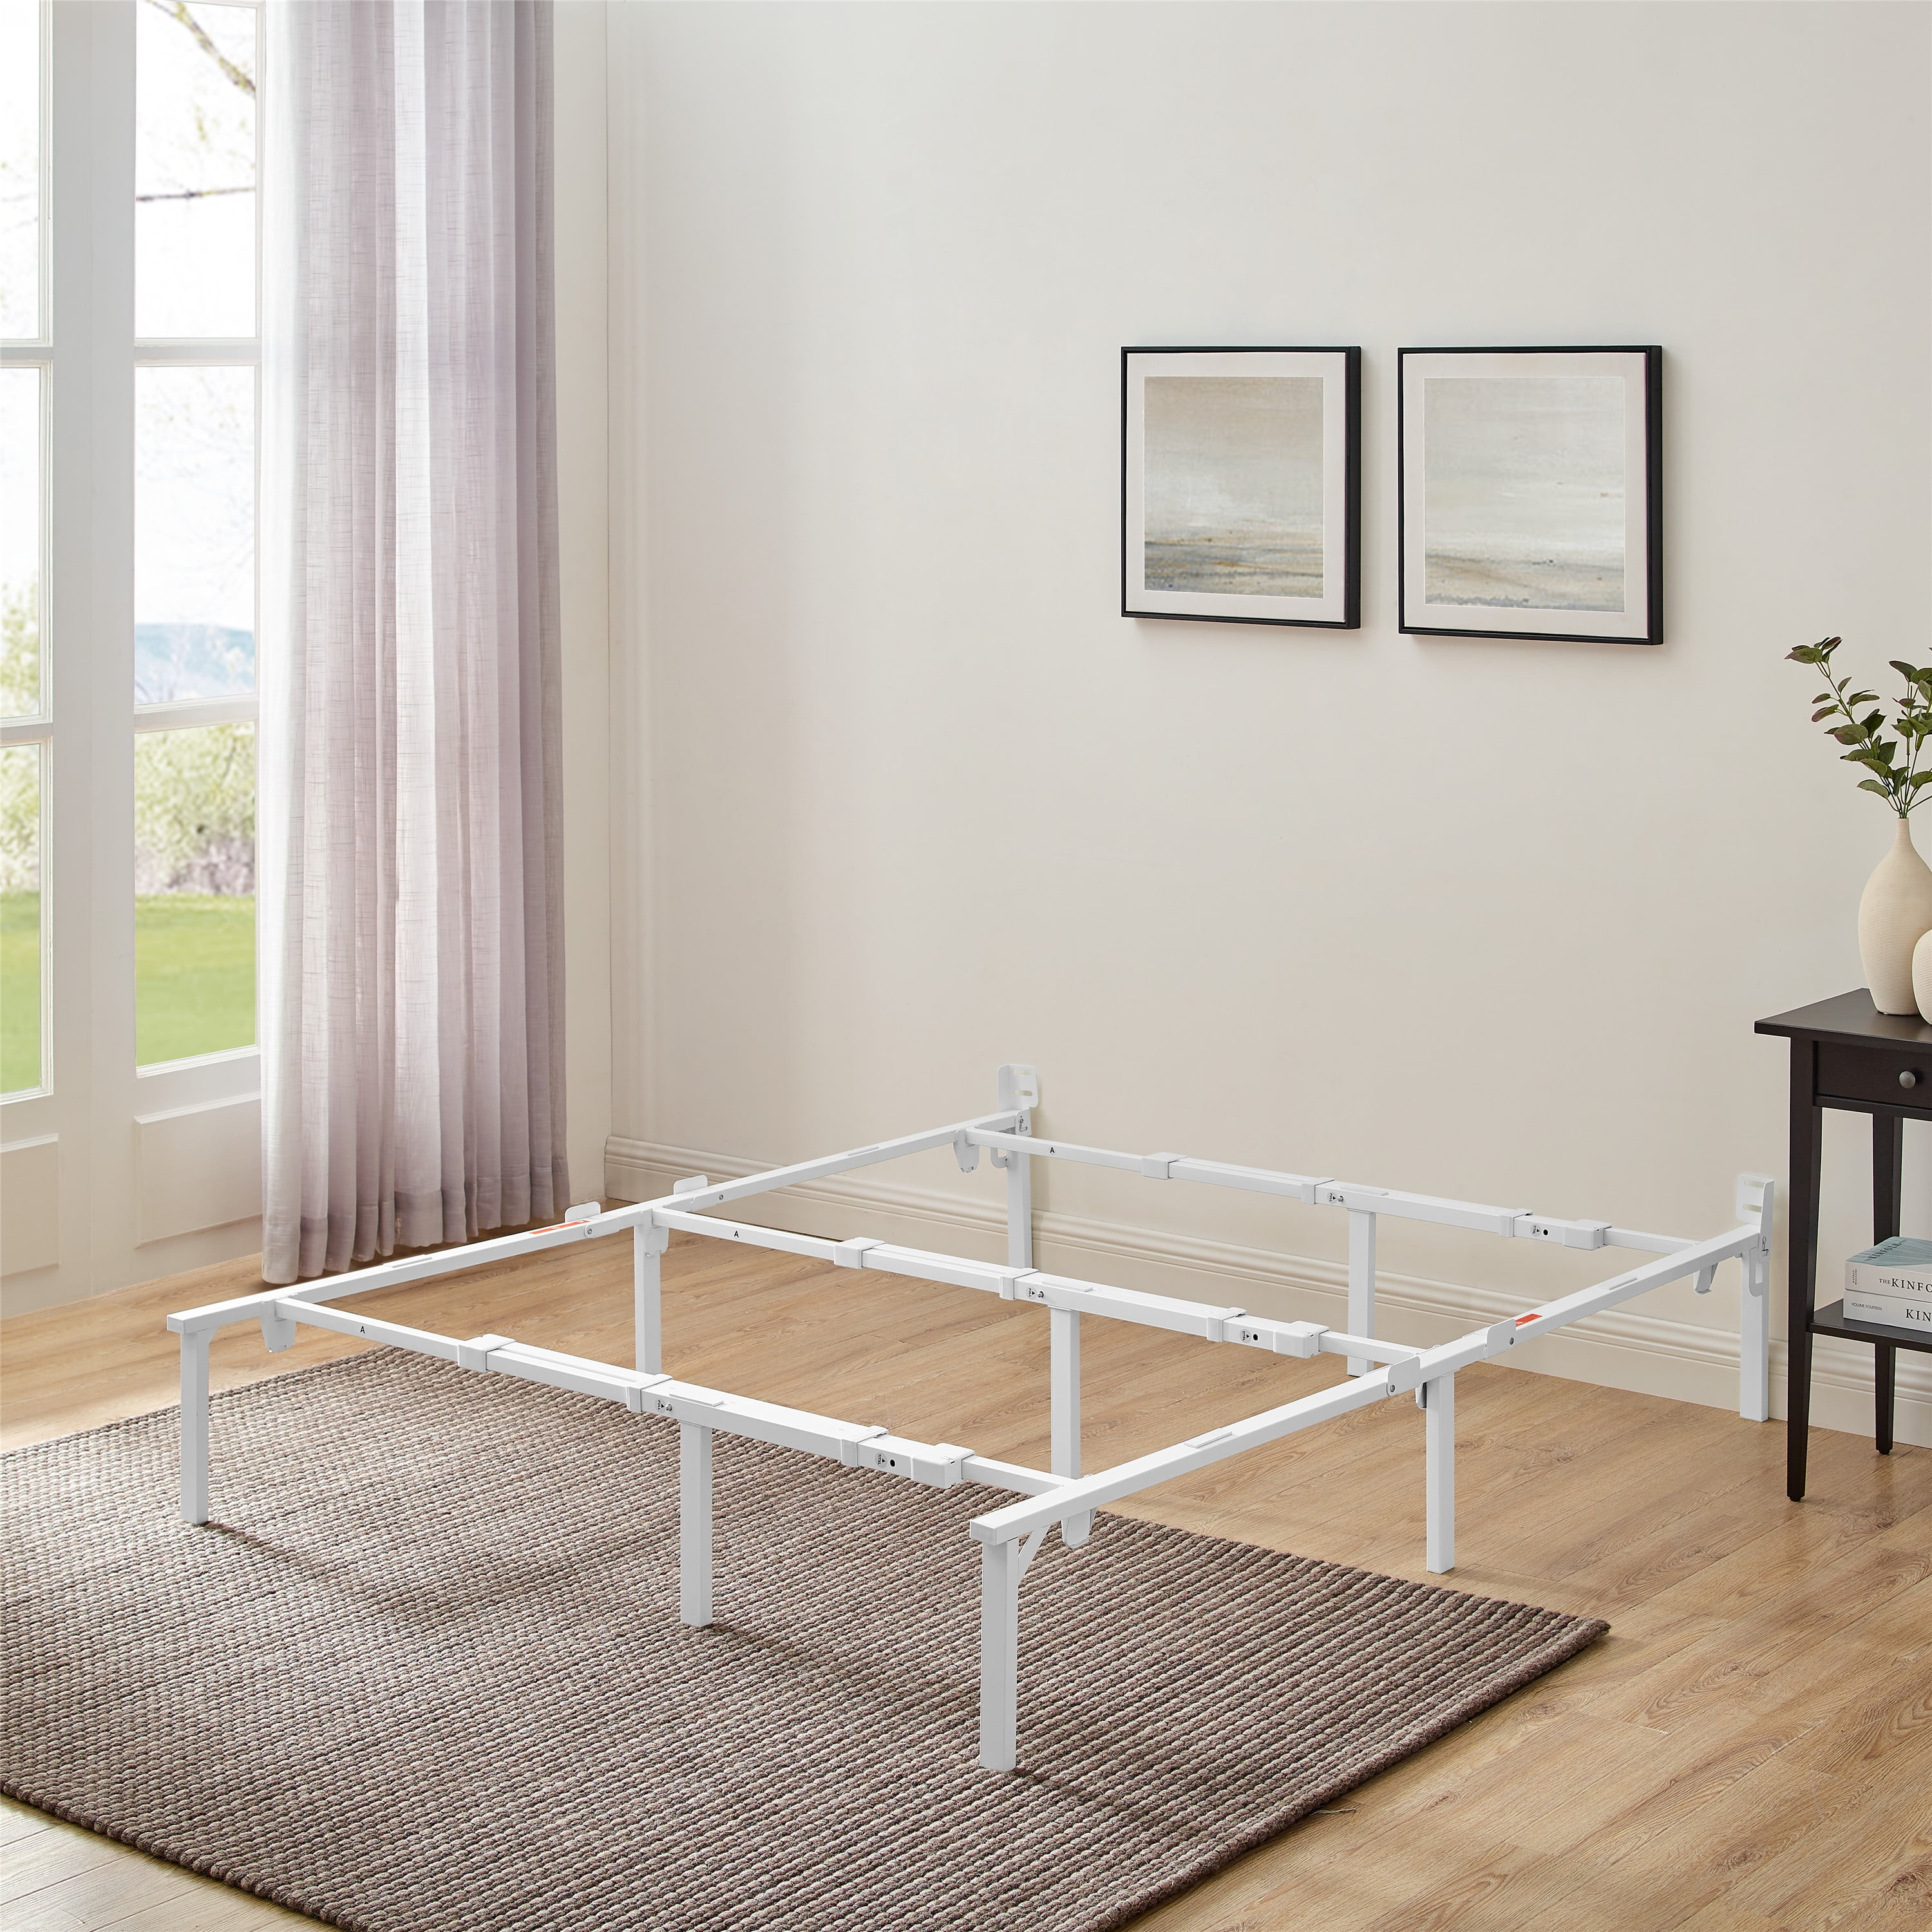 Mainstays 12 Adjustable Metal Bed, Mainstays Twin Bed Frame